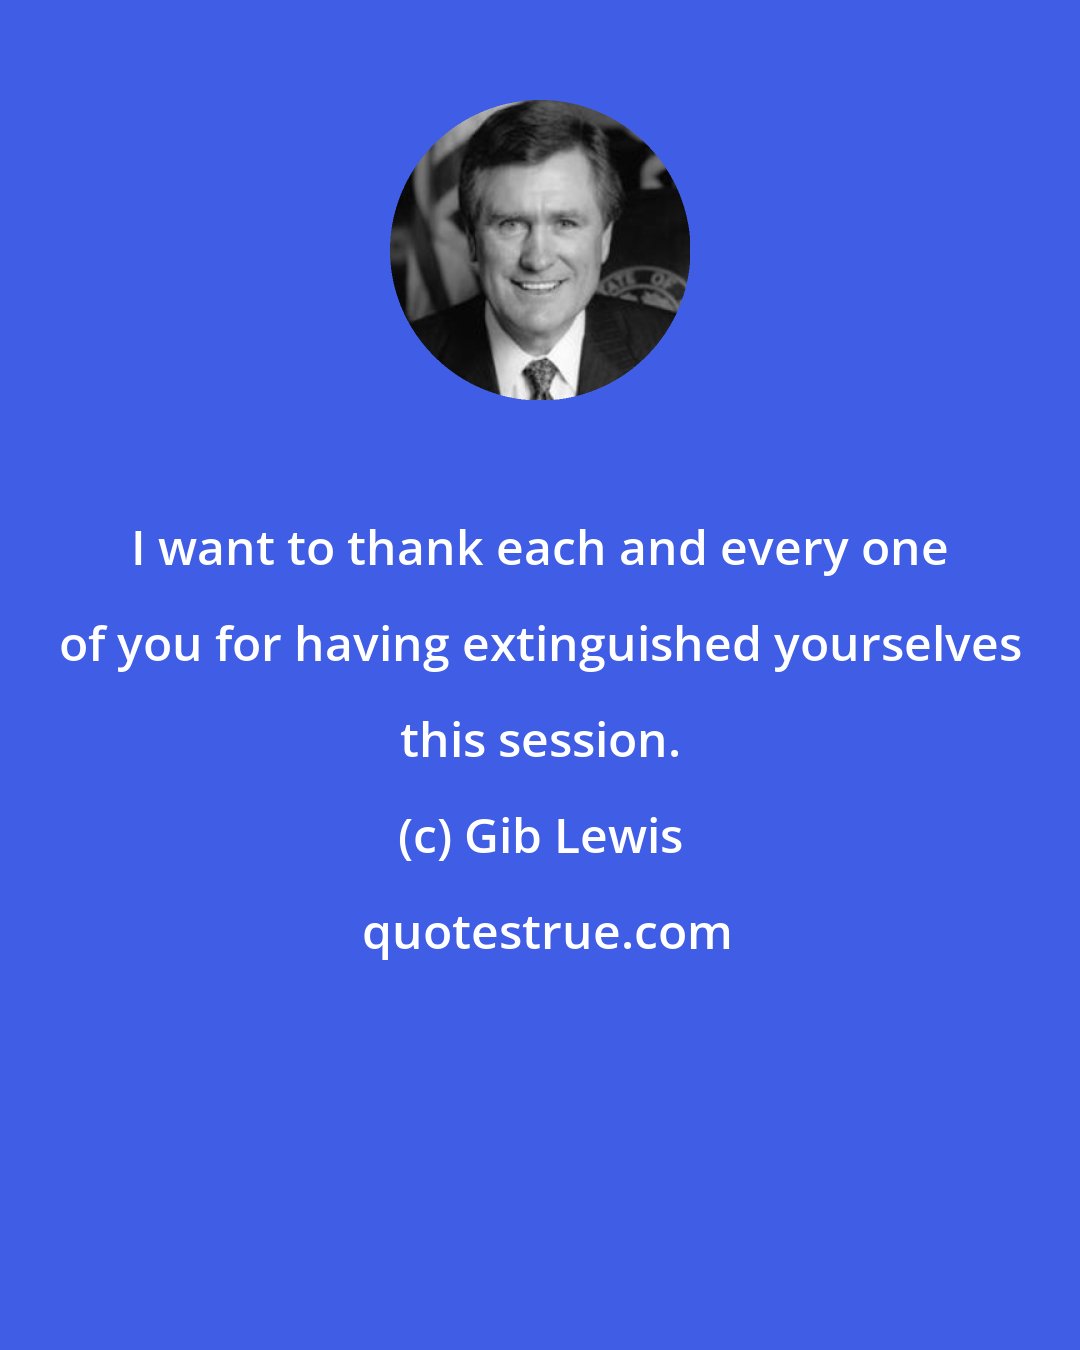 Gib Lewis: I want to thank each and every one of you for having extinguished yourselves this session.